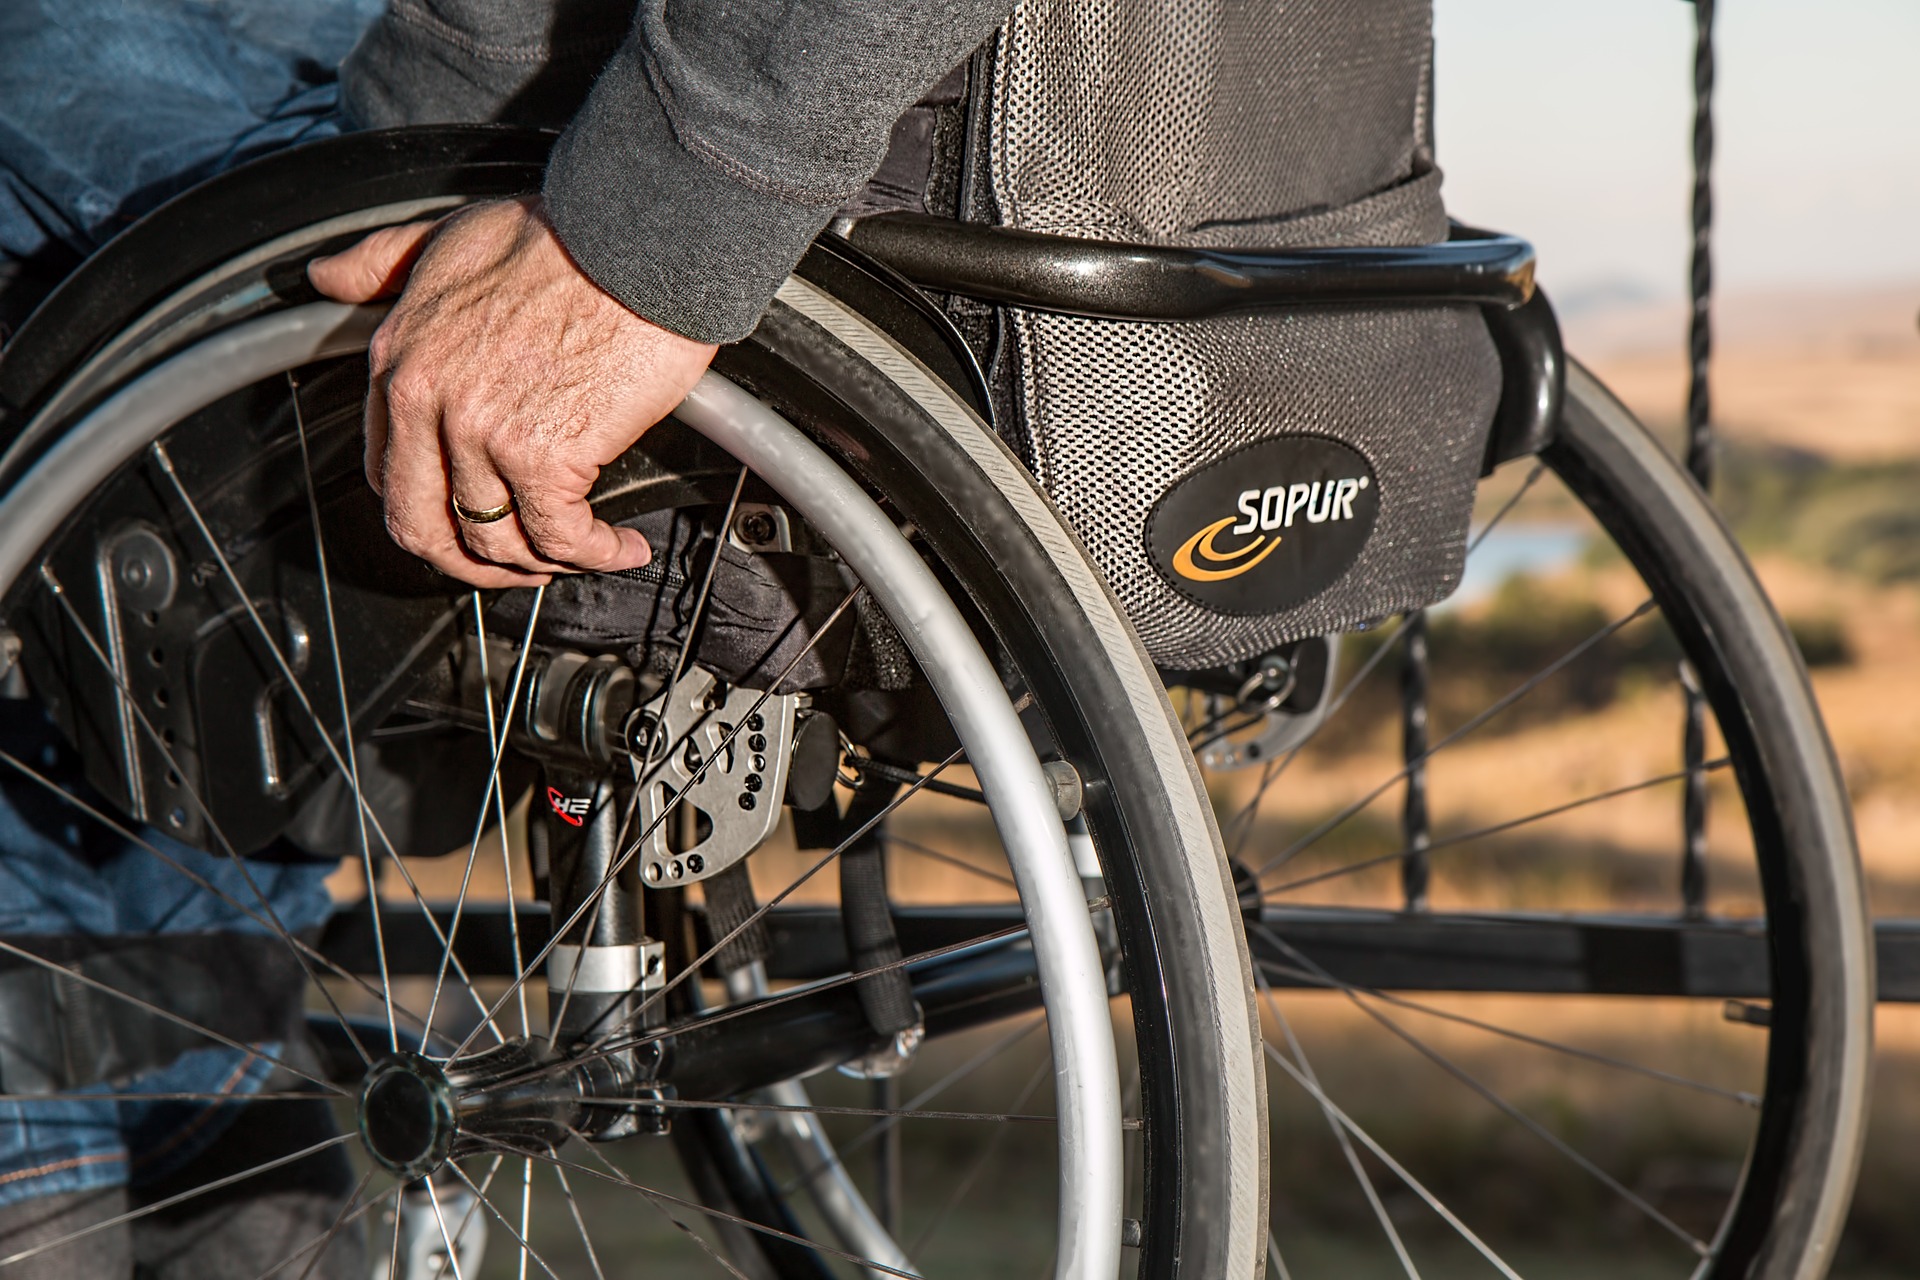 Wheelchair with man's hands on the wheels (source: stevepb, Pixabay)